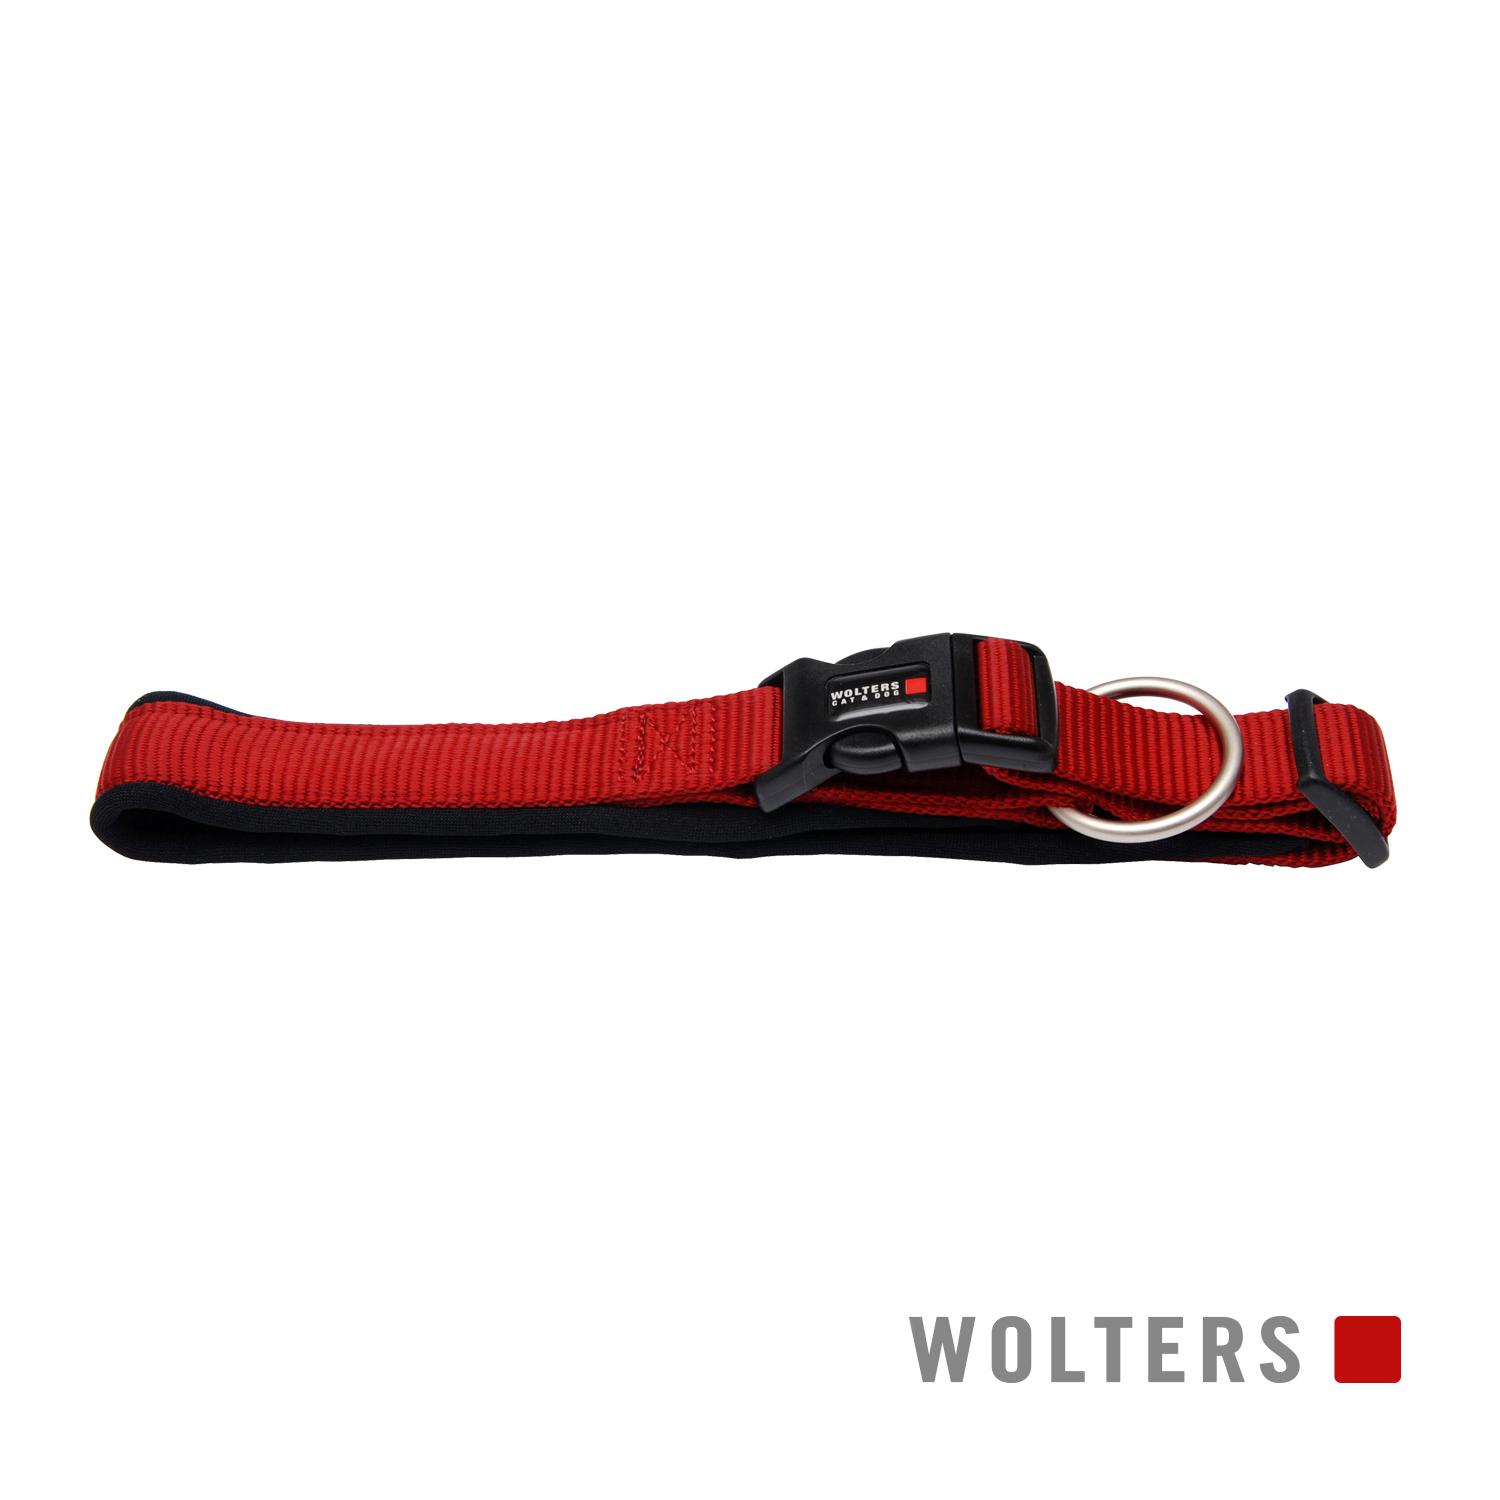 Wolters Halsband Professional Comfort Rot/Schwarz 50-55cm x 35mm